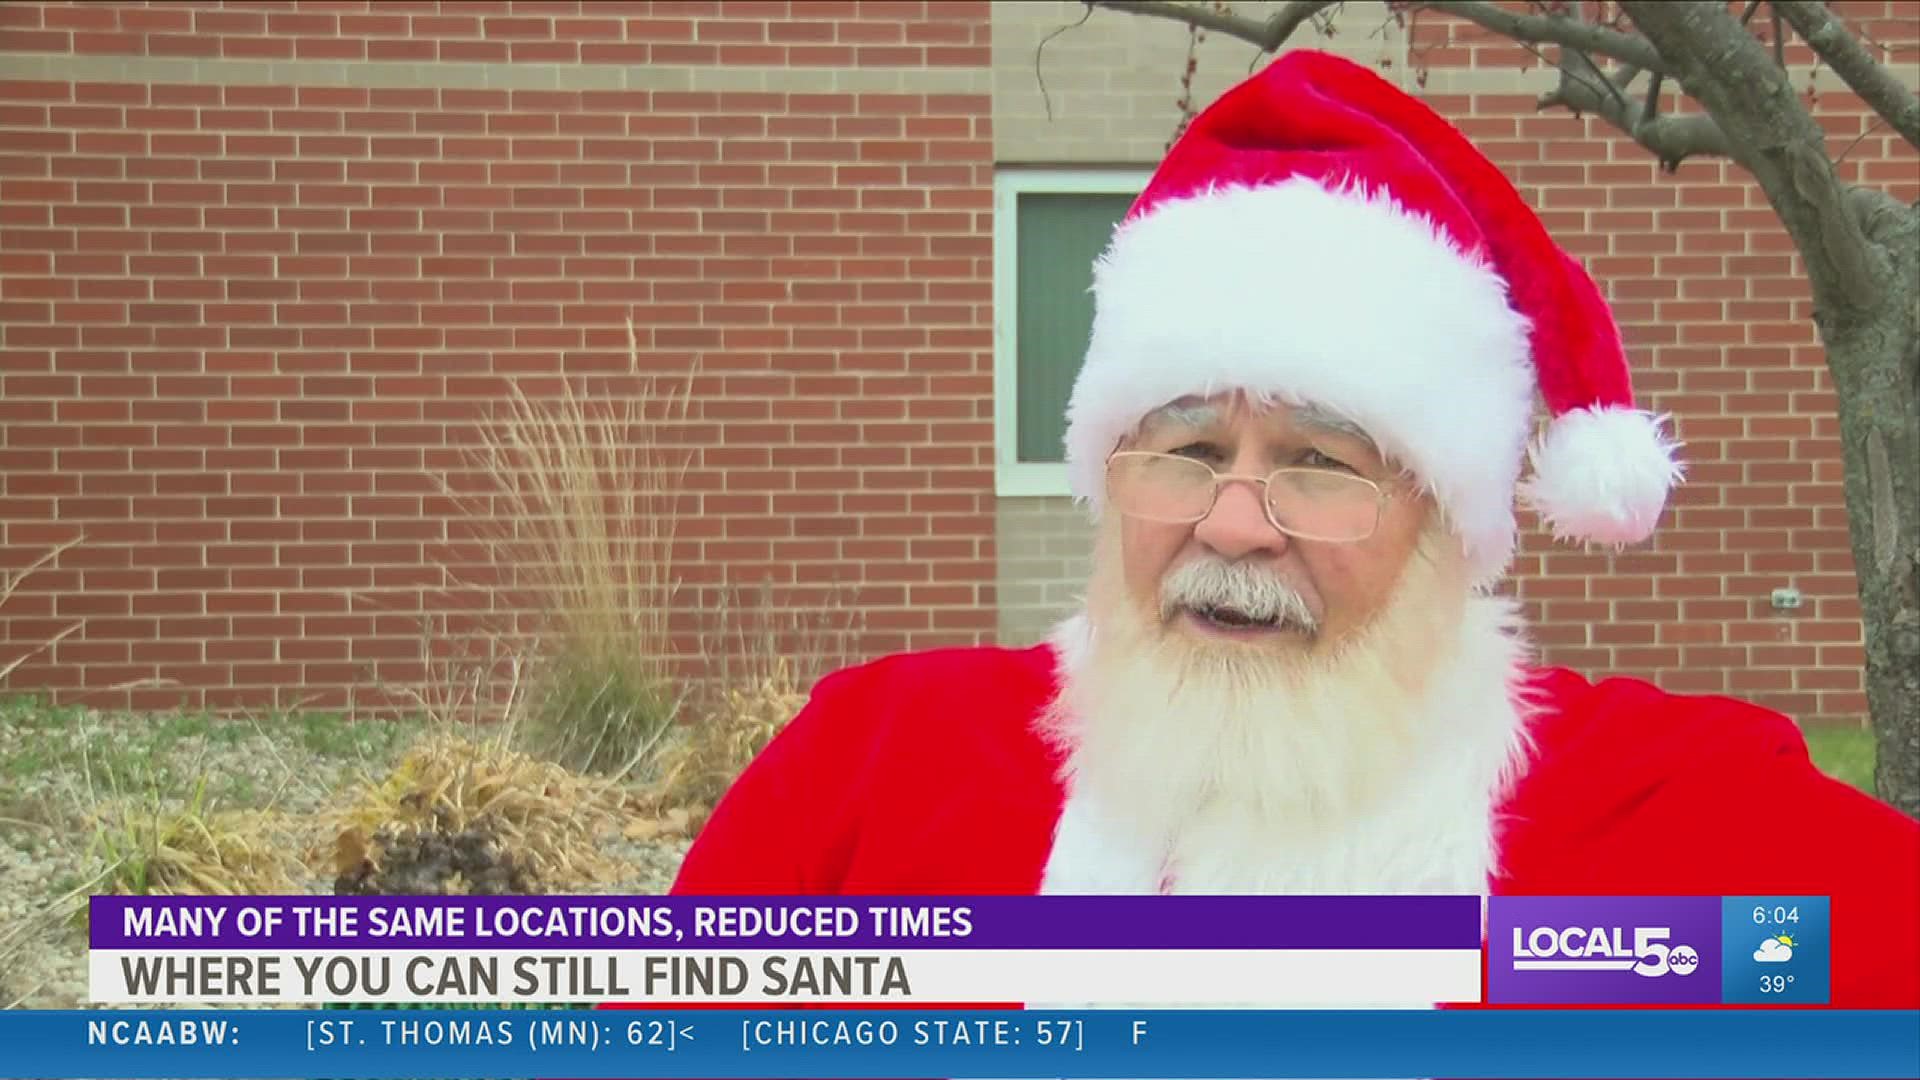 Mitch Allen with HireSanta.com said Santa Claus entertainers are at high risk for COVID.